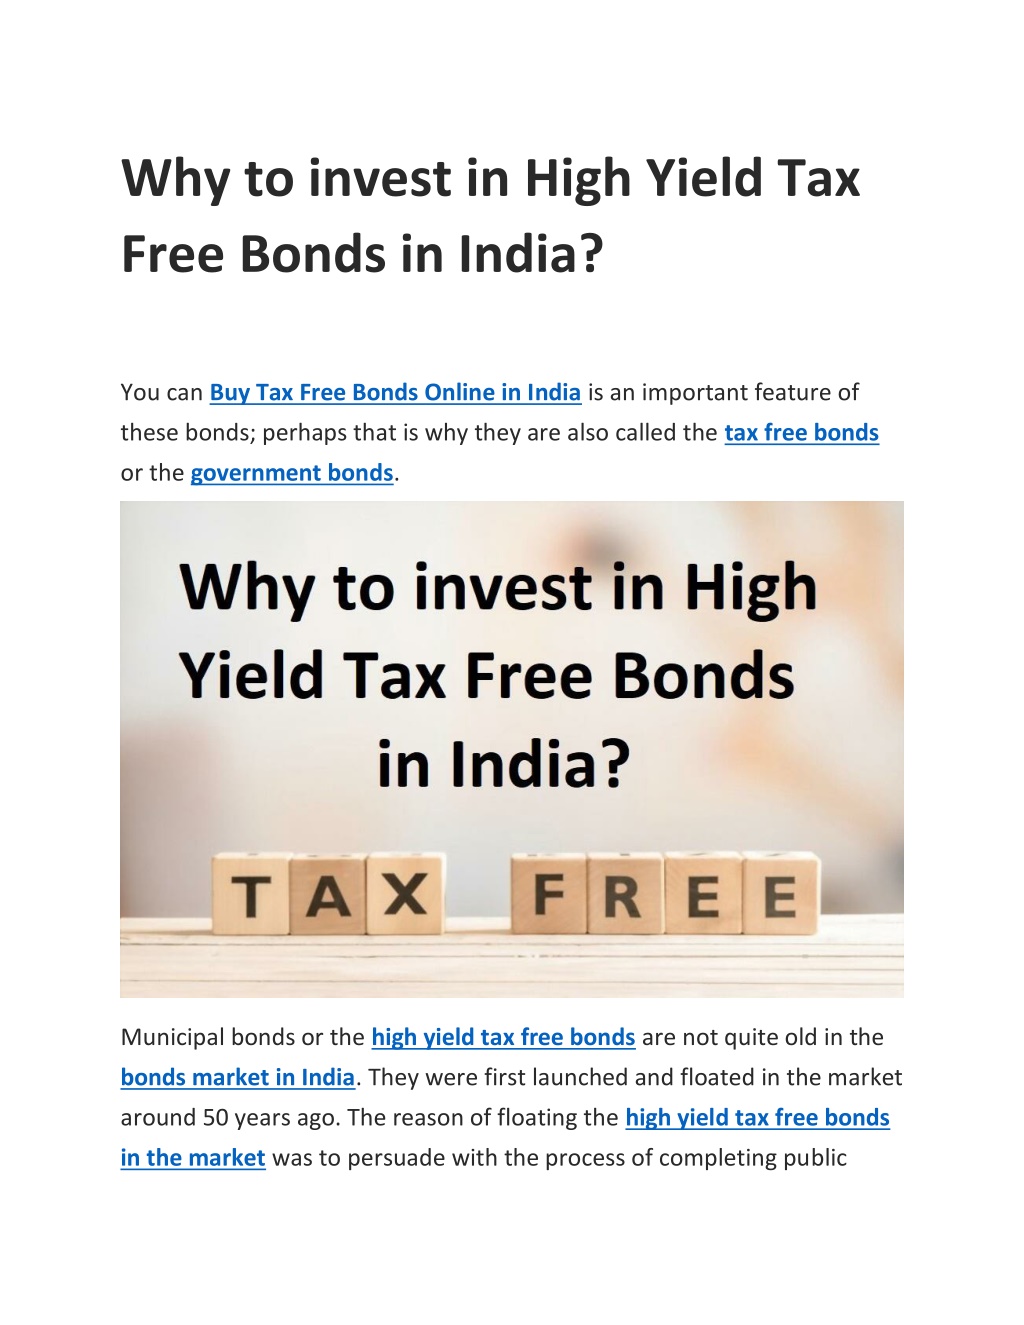 PPT Why to invest in High Yield Tax Free Bonds in India PowerPoint